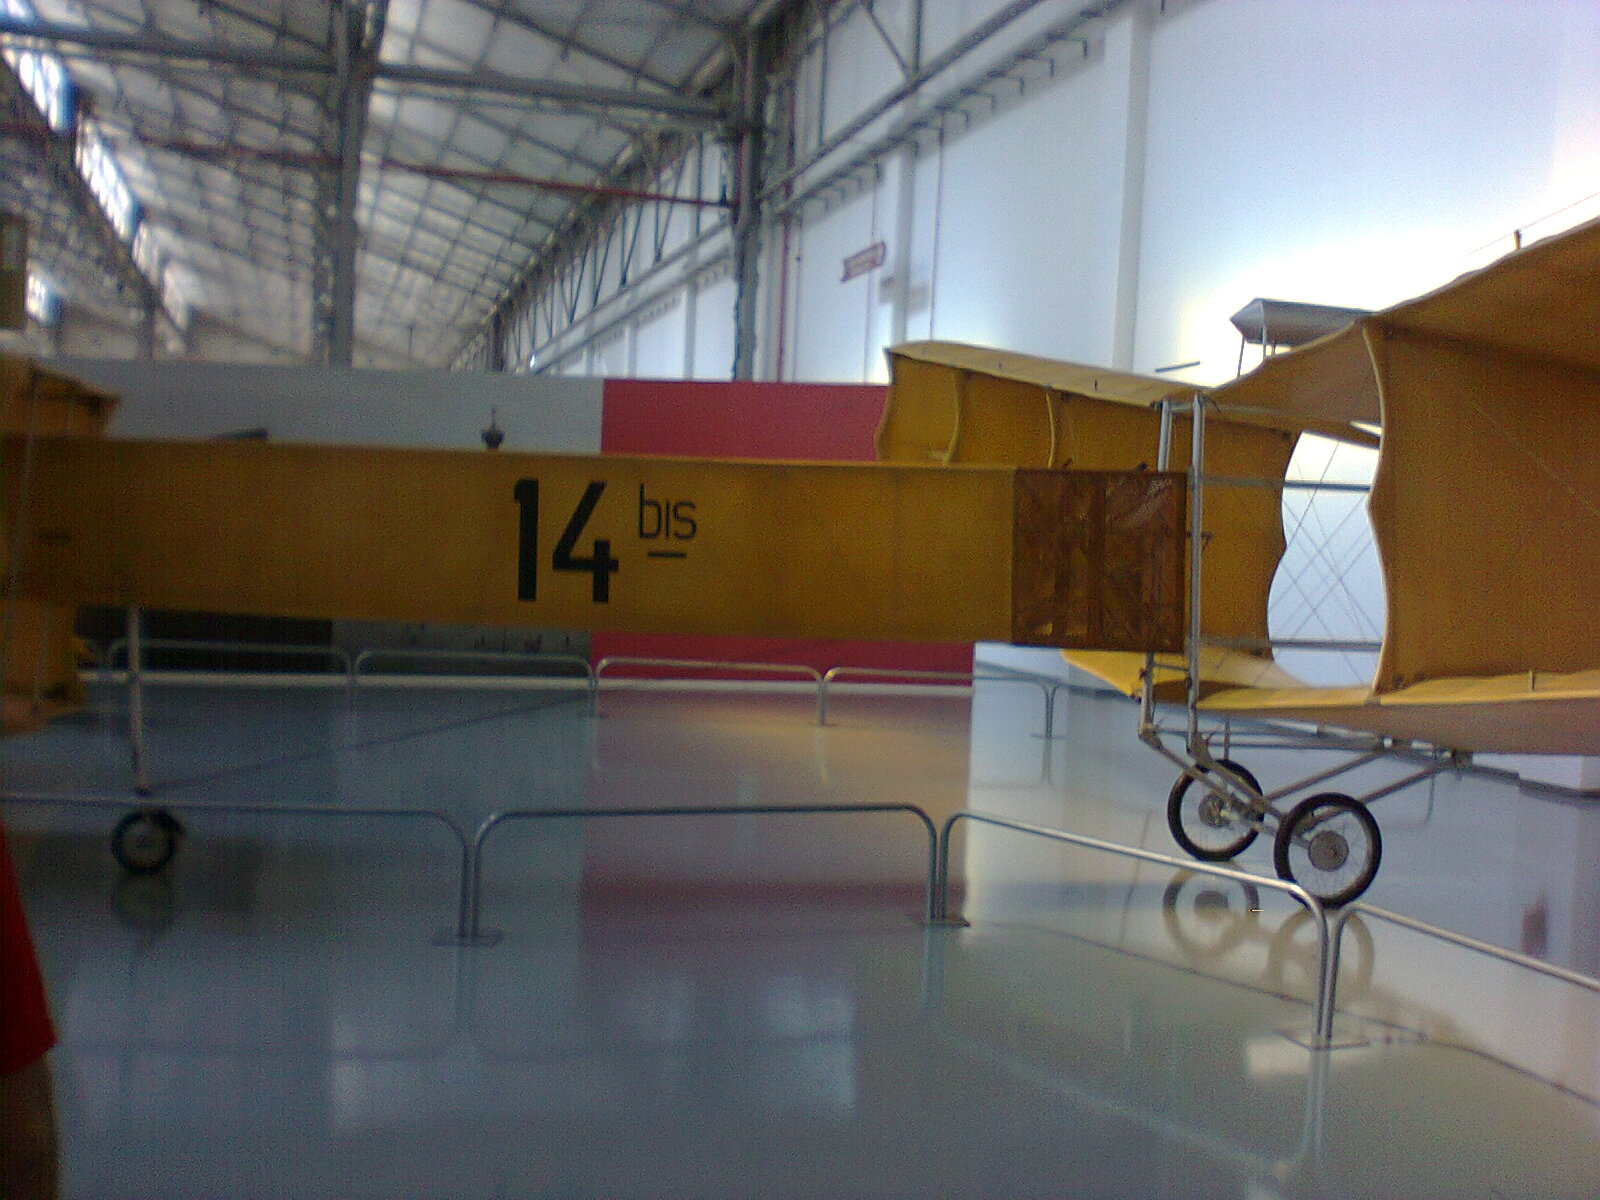 Model of the 14 Bis.